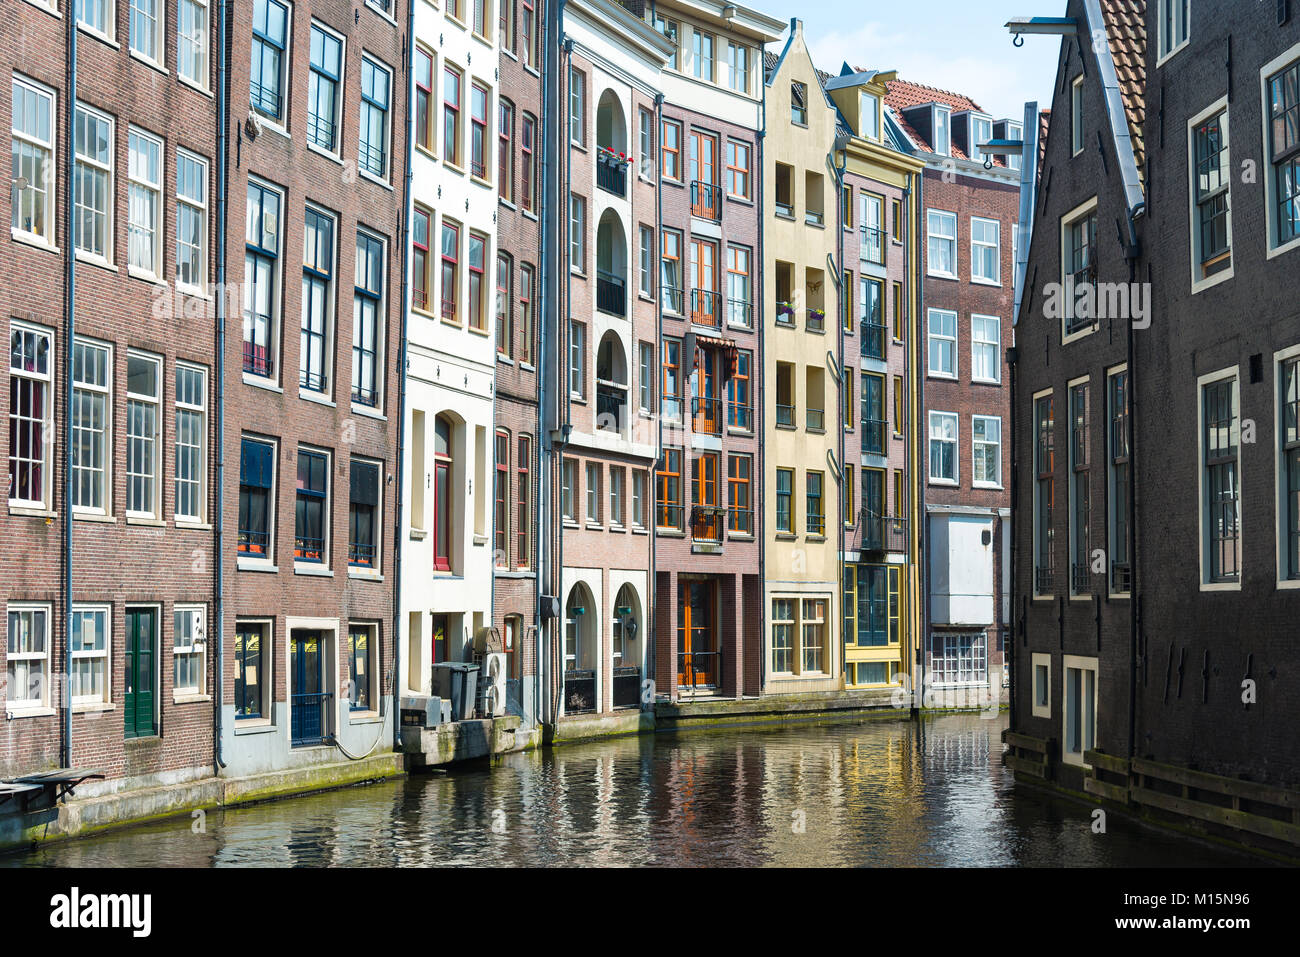 Amsterdam, Netherlands - April 20, 2017: Traditional old buildings in Amsterdam in spring, the Netherlands Stock Photo